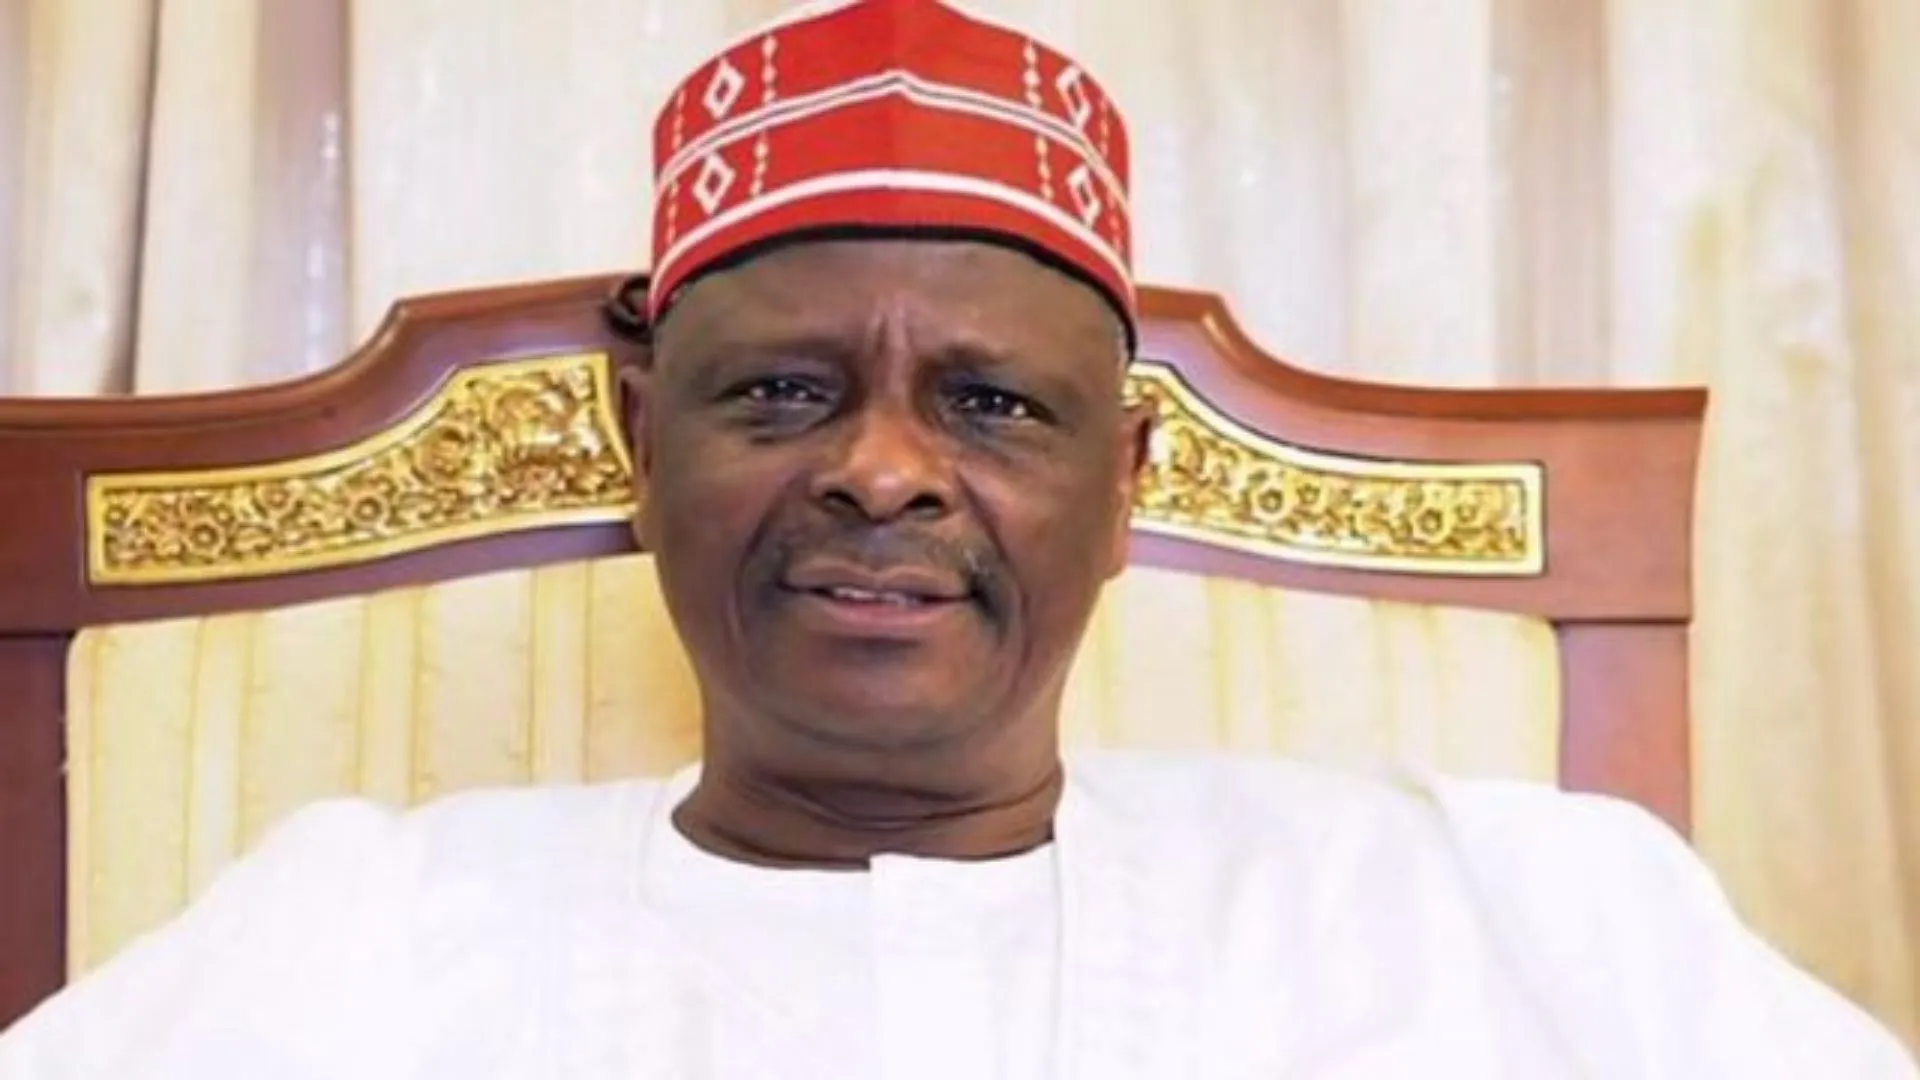 Board of Trustees of NNPP has suspended Kwankwaso over Alleged Anti-party Activities